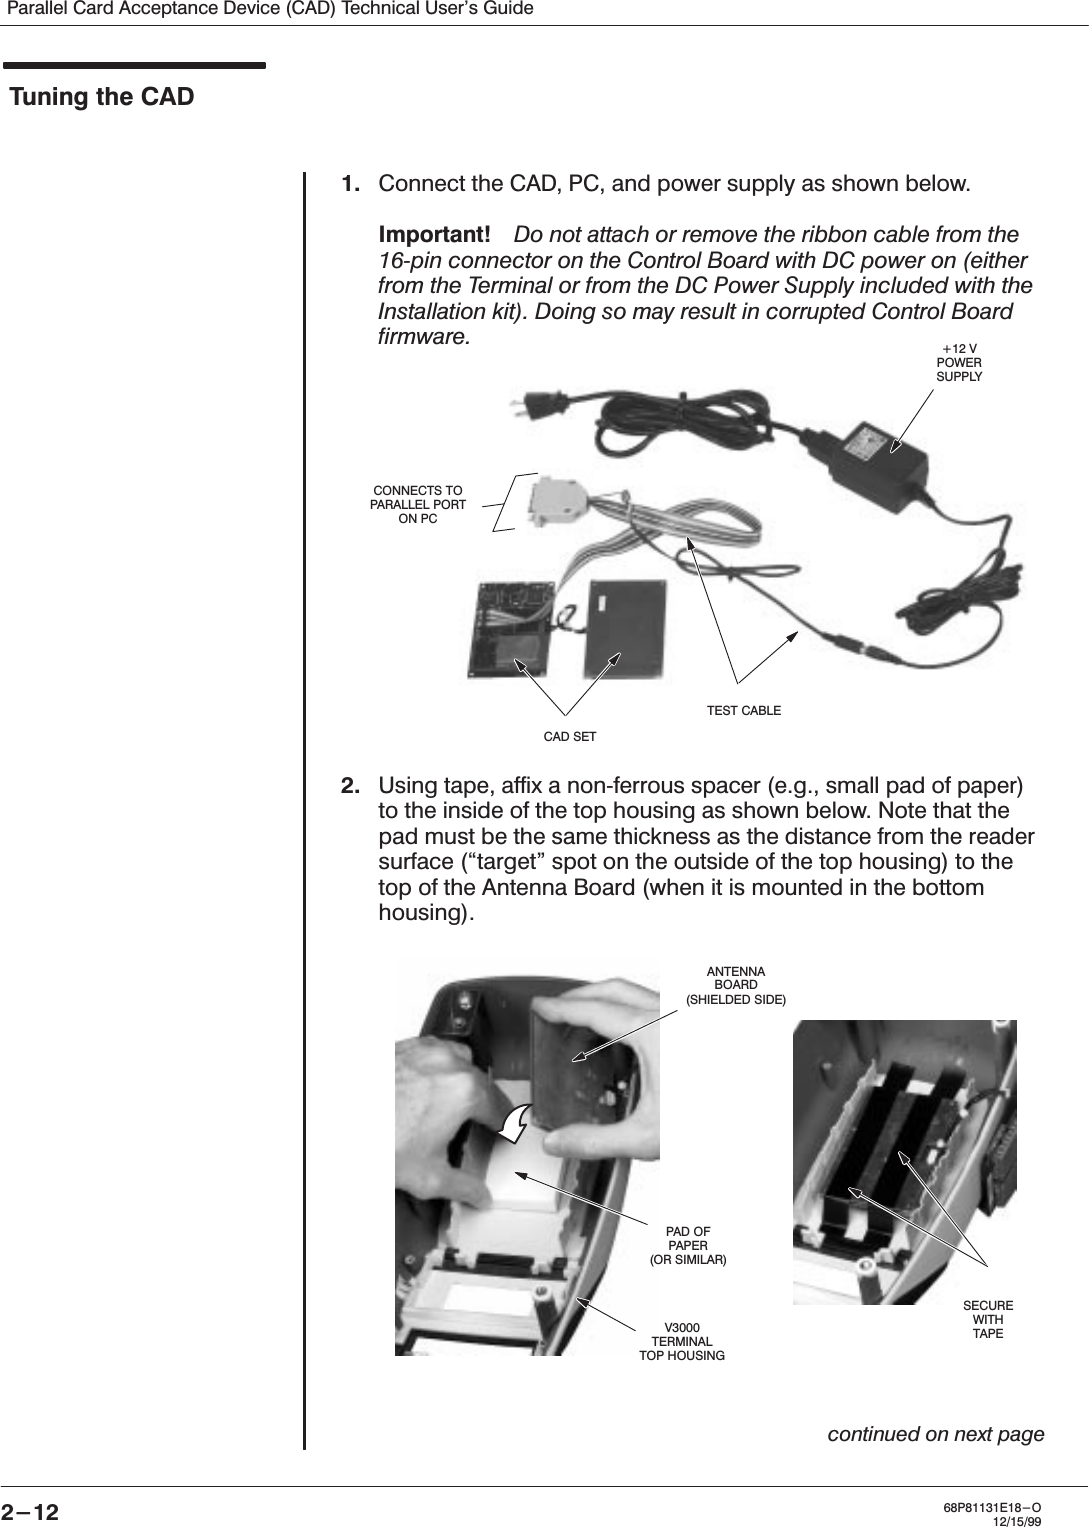 Parallel Card Acceptance Device (CAD) Technical User&apos;s Guide2-12 68P81131E18-O12/15/99Tuning the CAD1. Connect the CAD, PC, and power supply as shown below.Important!ąDo not attach or remove the ribbon cable from the16Ćpin connector on the Control Board with DC power on (eitherfrom the Terminal or from the DC Power Supply included with theInstallation kit). Doing so may result in corrupted Control Boardfirmware.2. Using tape, affix a nonĆferrous spacer (e.g., small pad of paper)to the inside of the top housing as shown below. Note that thepad must be the same thickness as the distance from the readersurface (target&quot; spot on the outside of the top housing) to thetop of the Antenna Board (when it is mounted in the bottomhousing).continued on next page+12 VPOWERSUPPLYCAD SETTEST CABLECONNECTS TOPARALLEL PORTON PCANTENNABOARD(SHIELDED SIDE)PAD OFPAPER(OR SIMILAR)V3000TERMINALTOP HOUSINGSECUREWITHTAPE